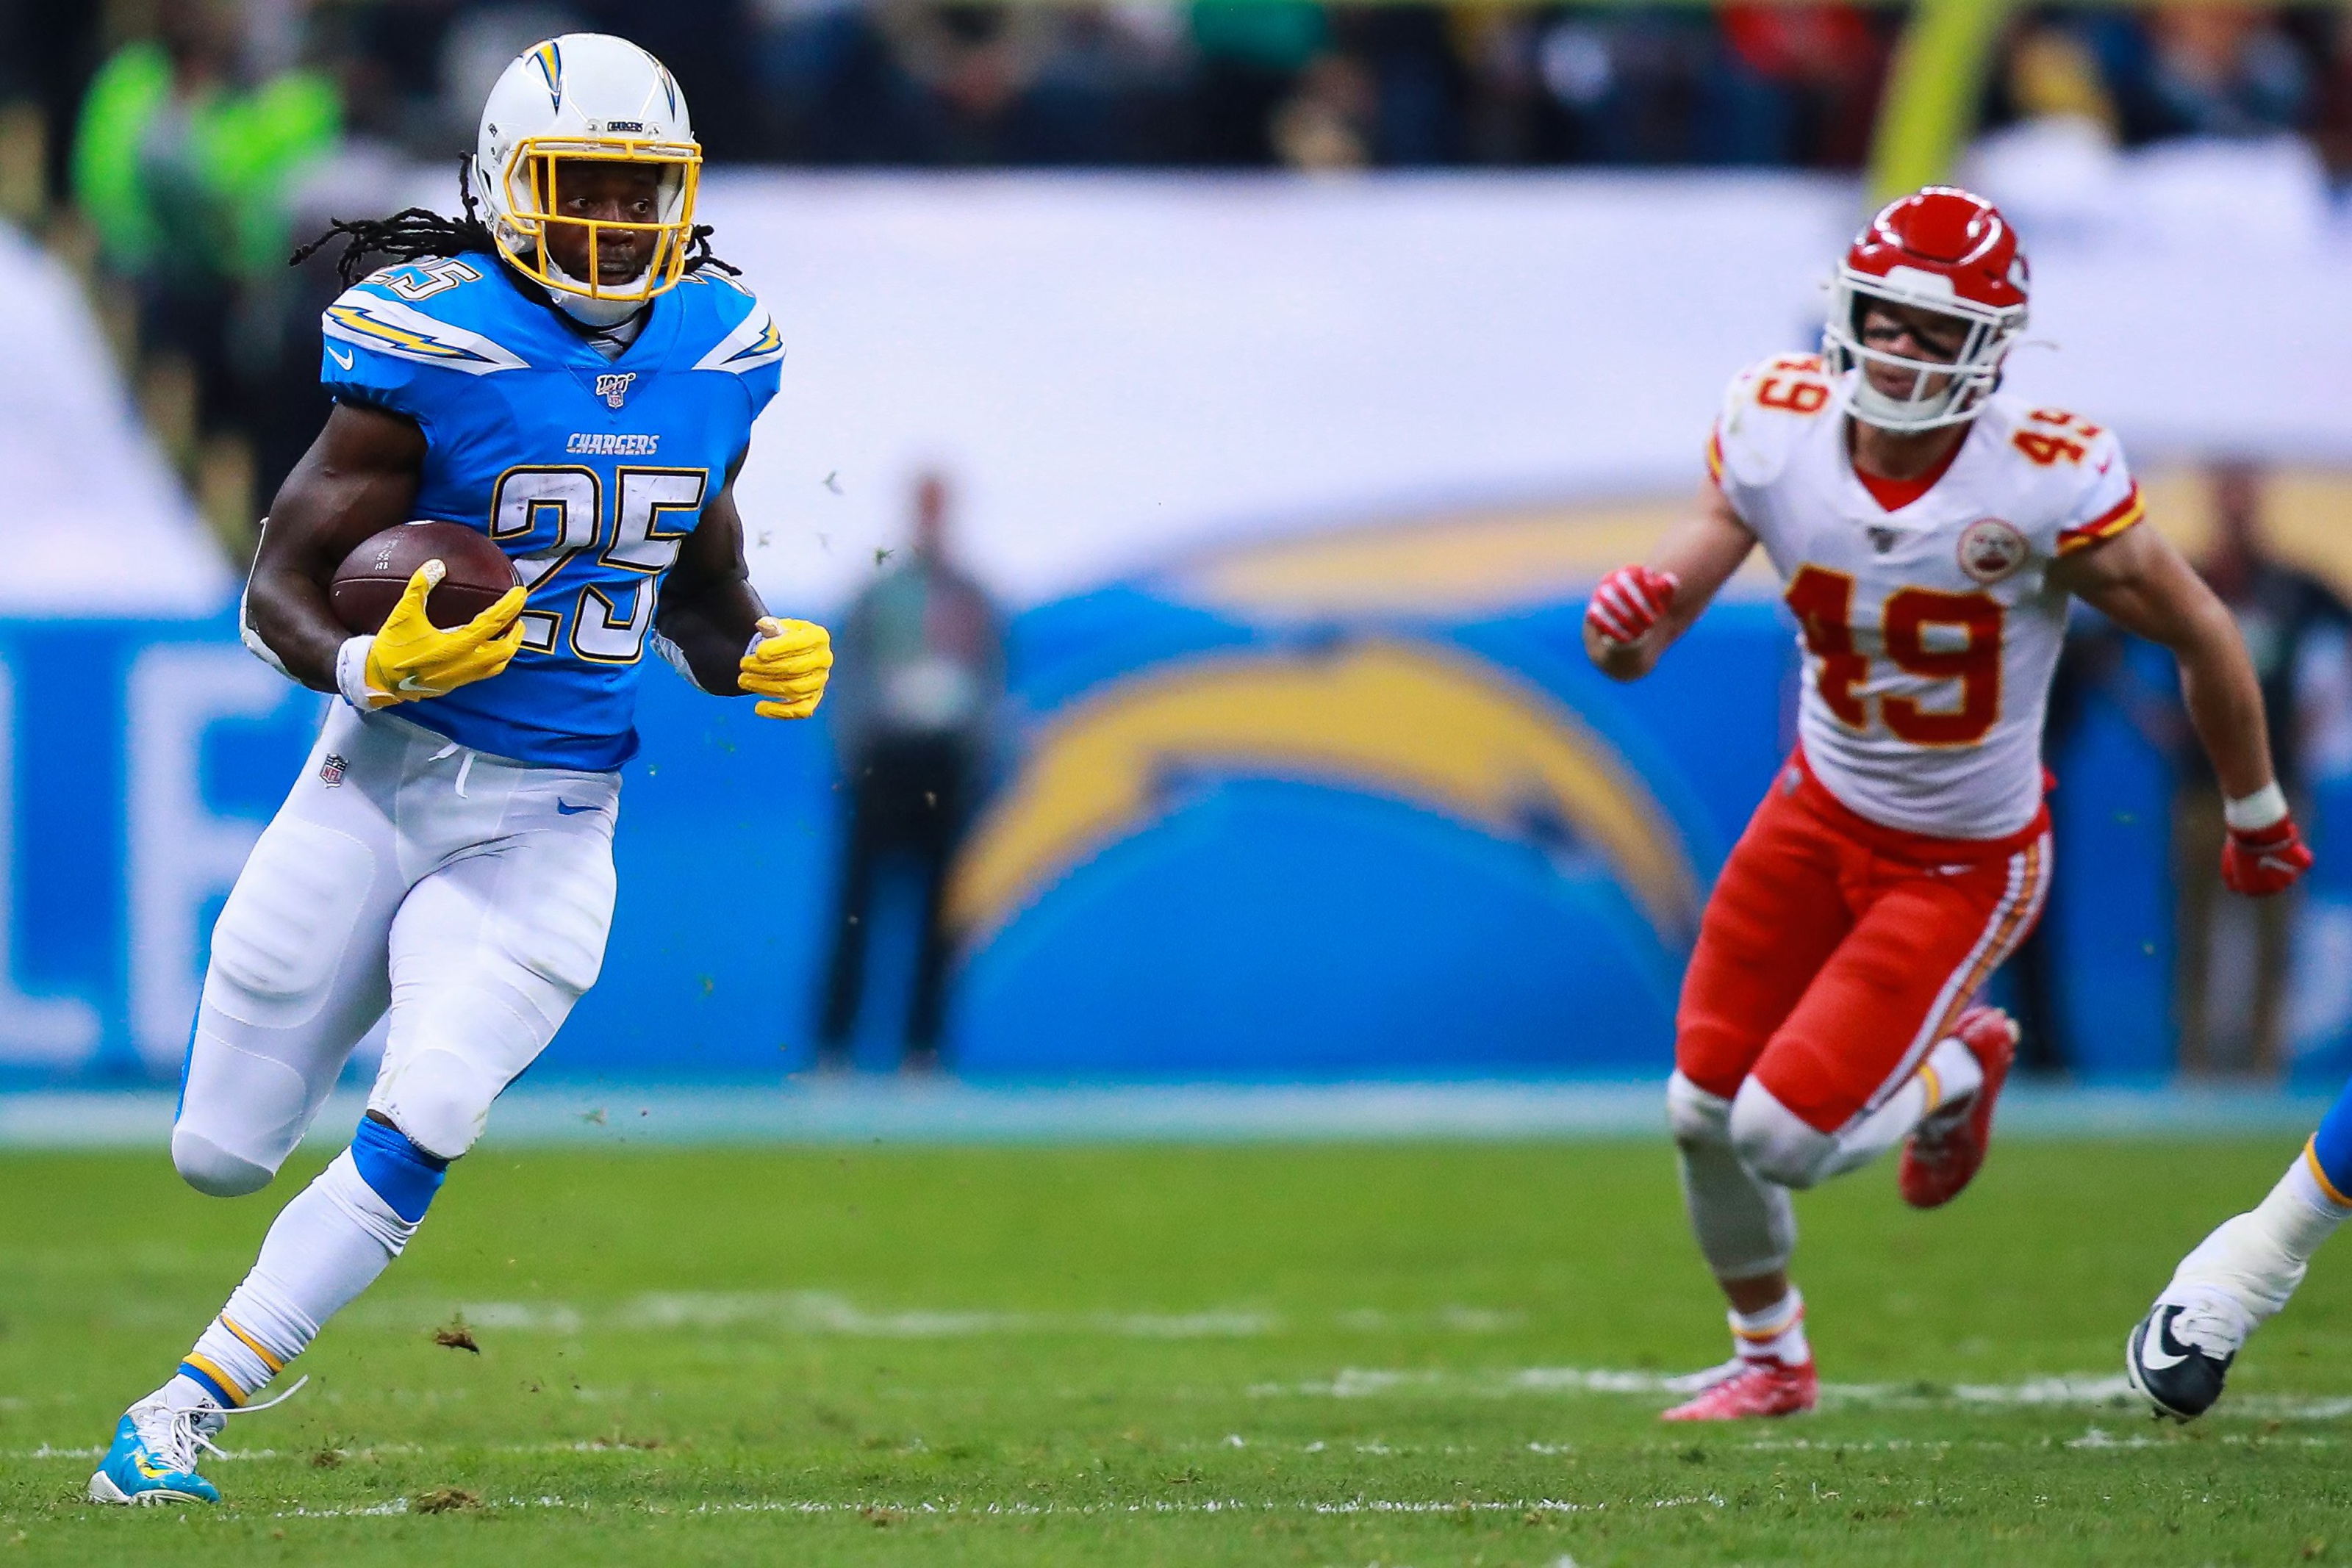 Los Angeles Chargers: 2015 NFL Draft retrospective